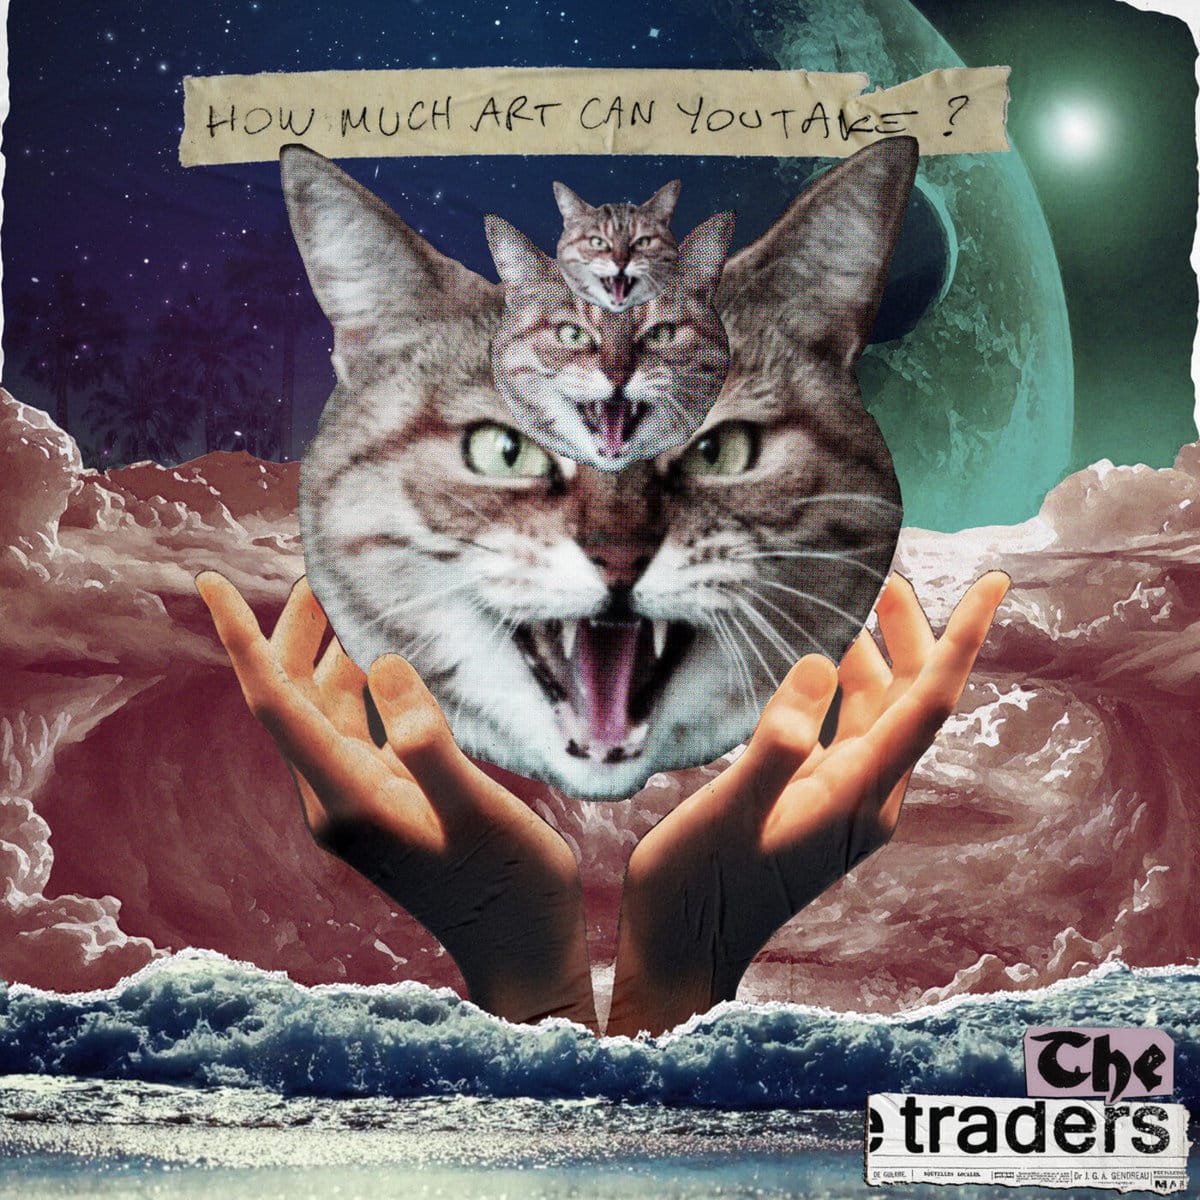 The Traders – How Much Art Can You Take? col.LP "How Much Art Can You Take ?" - Album 2023 by The Traders